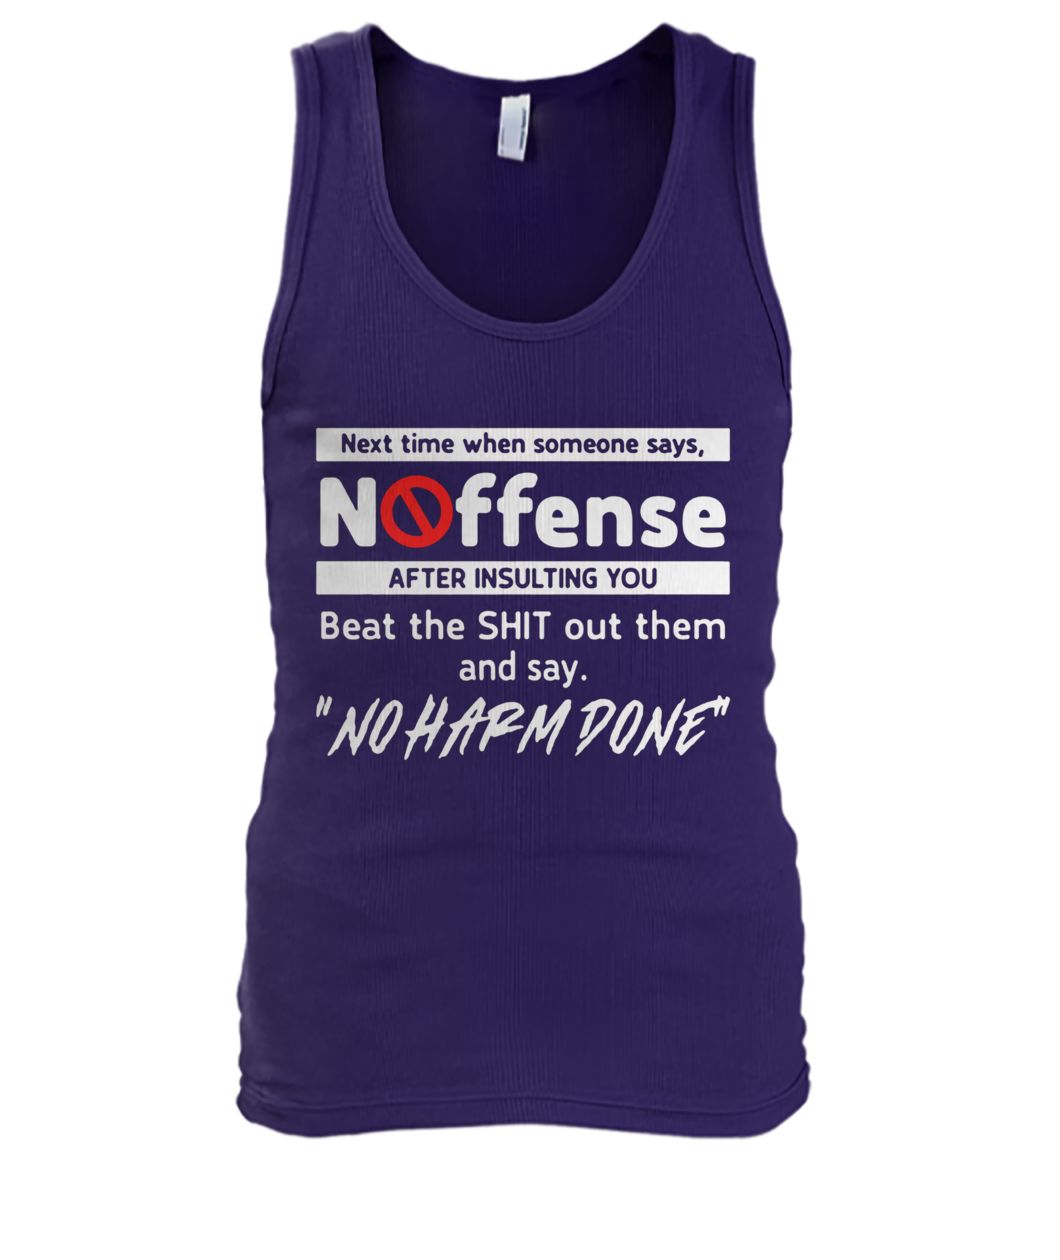 Next time when someone says no offense after insulting you men's tank top